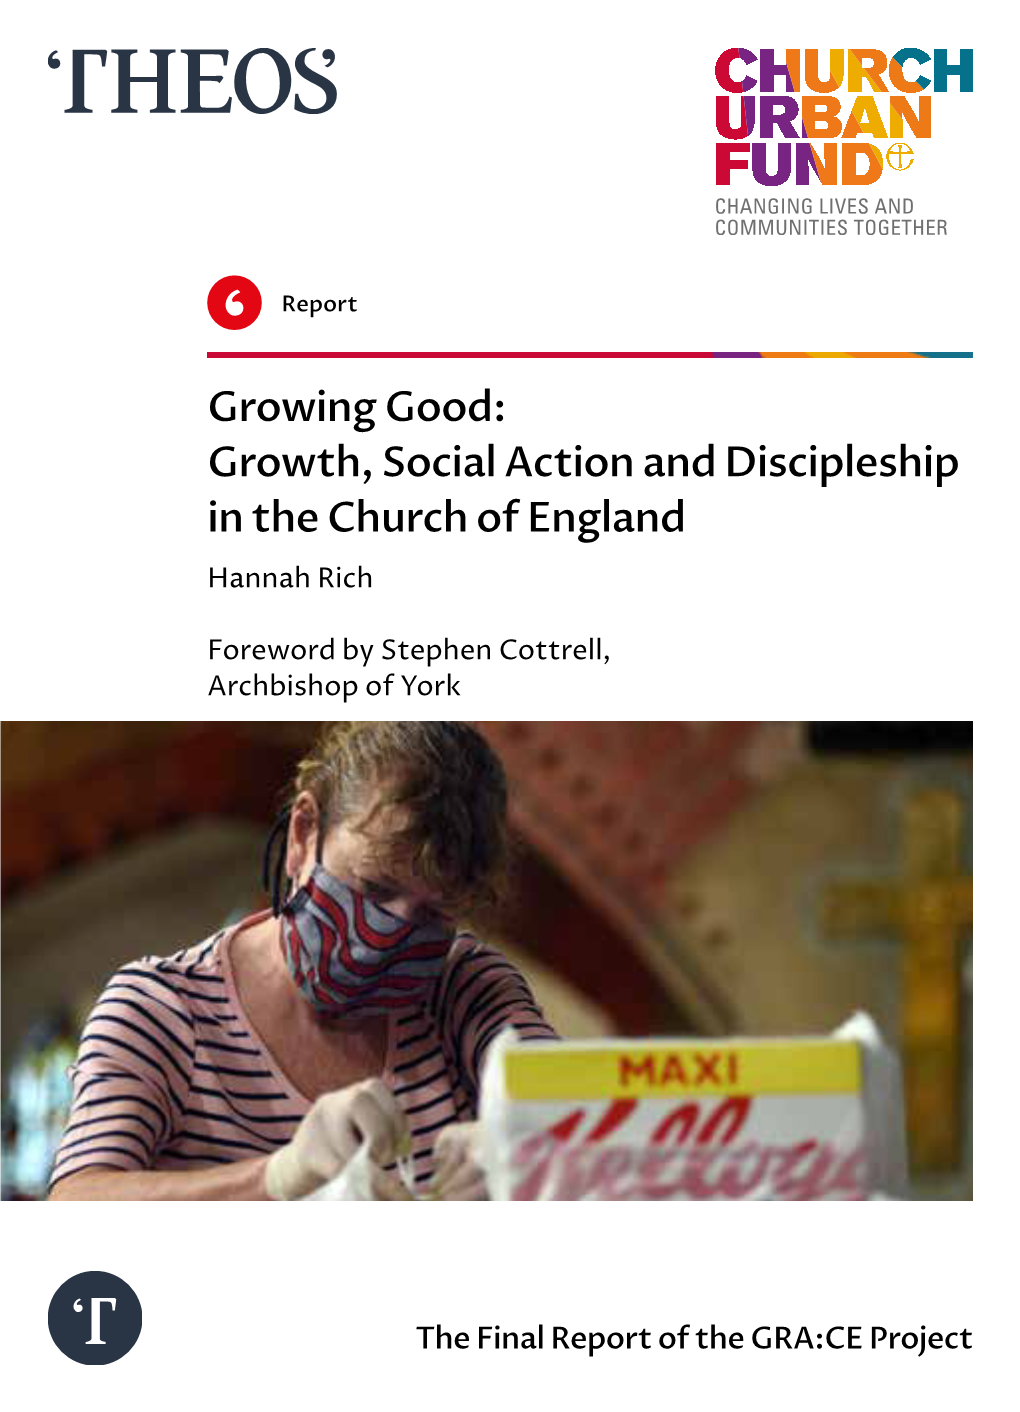 Growing Good: Growth, Social Action and Discipleship in the Church of England Hannah Rich